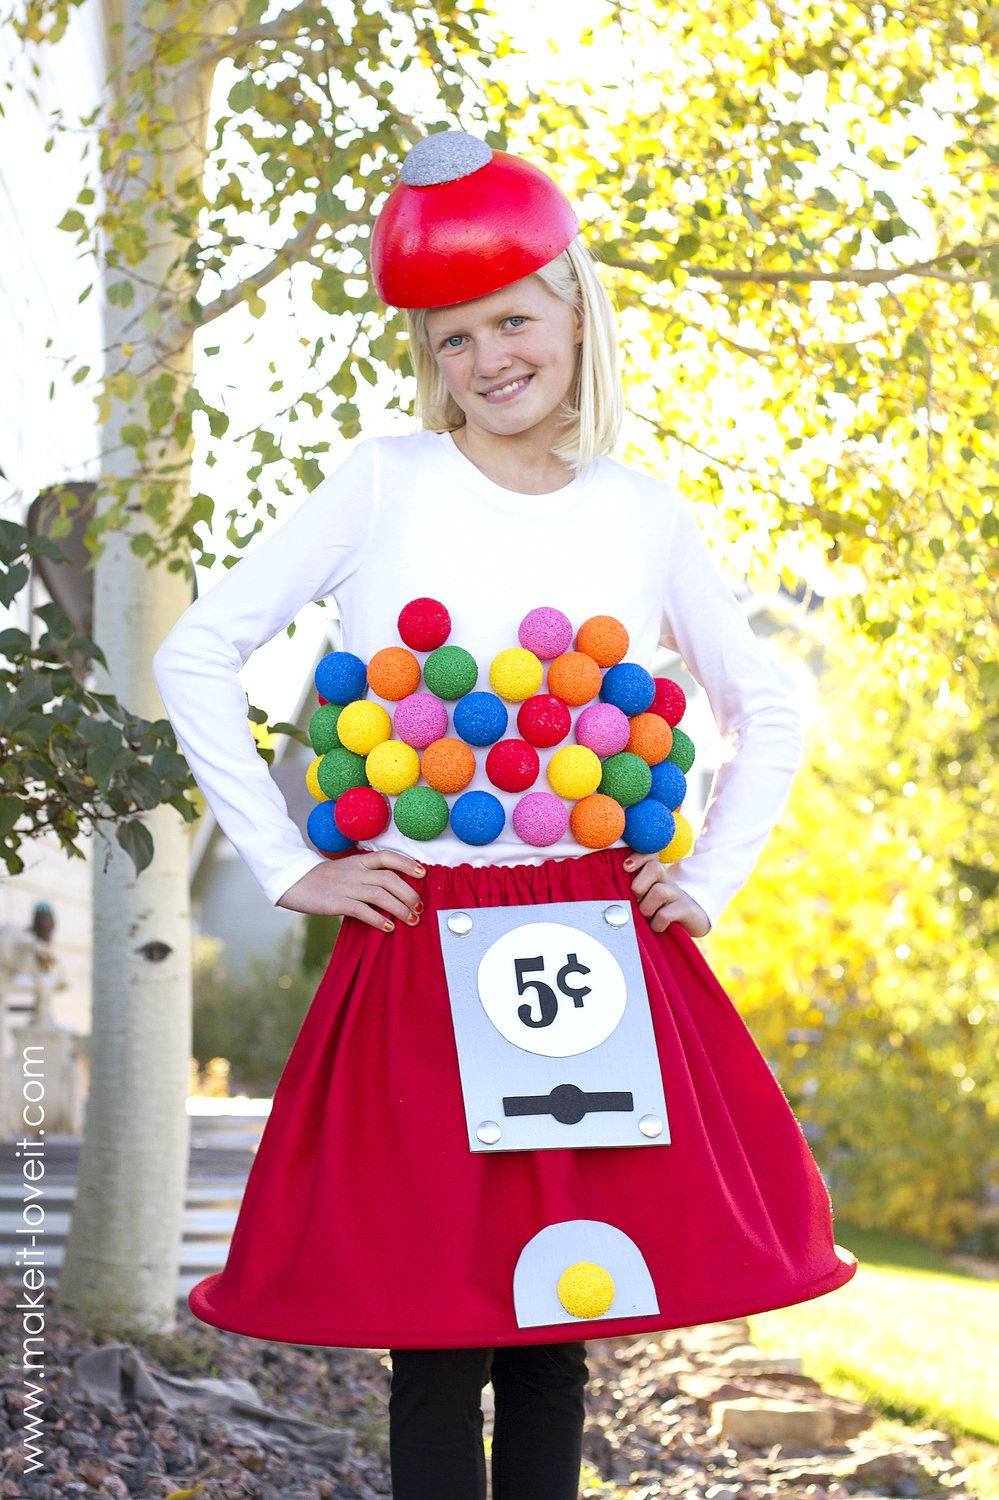 Gumball Machine Costume DIY
 38 of the most CLEVER & UNIQUE Costume Ideas